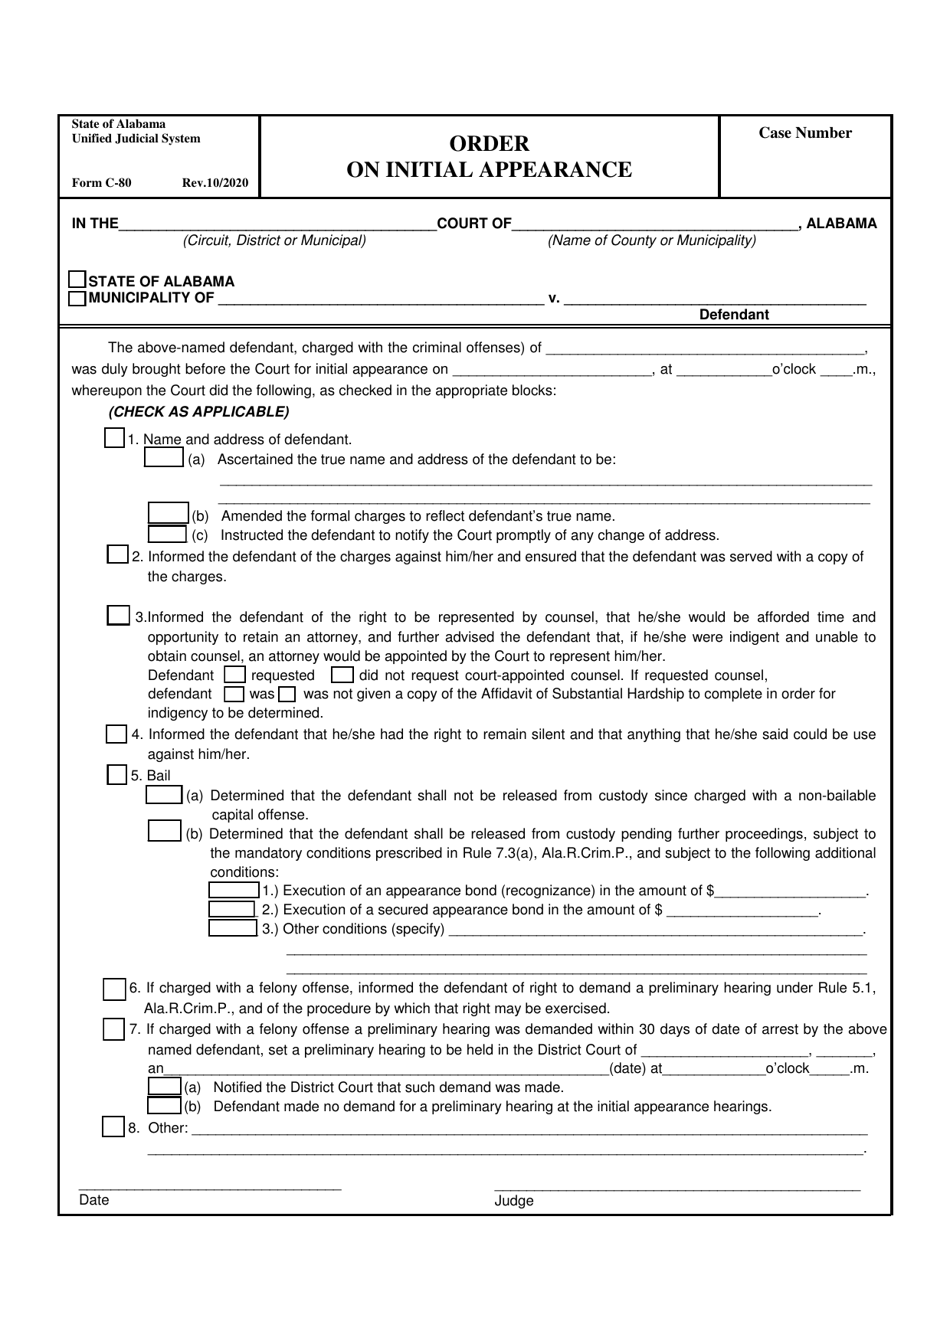 Form C-80 Order on Initial Appearance - Alabama, Page 1